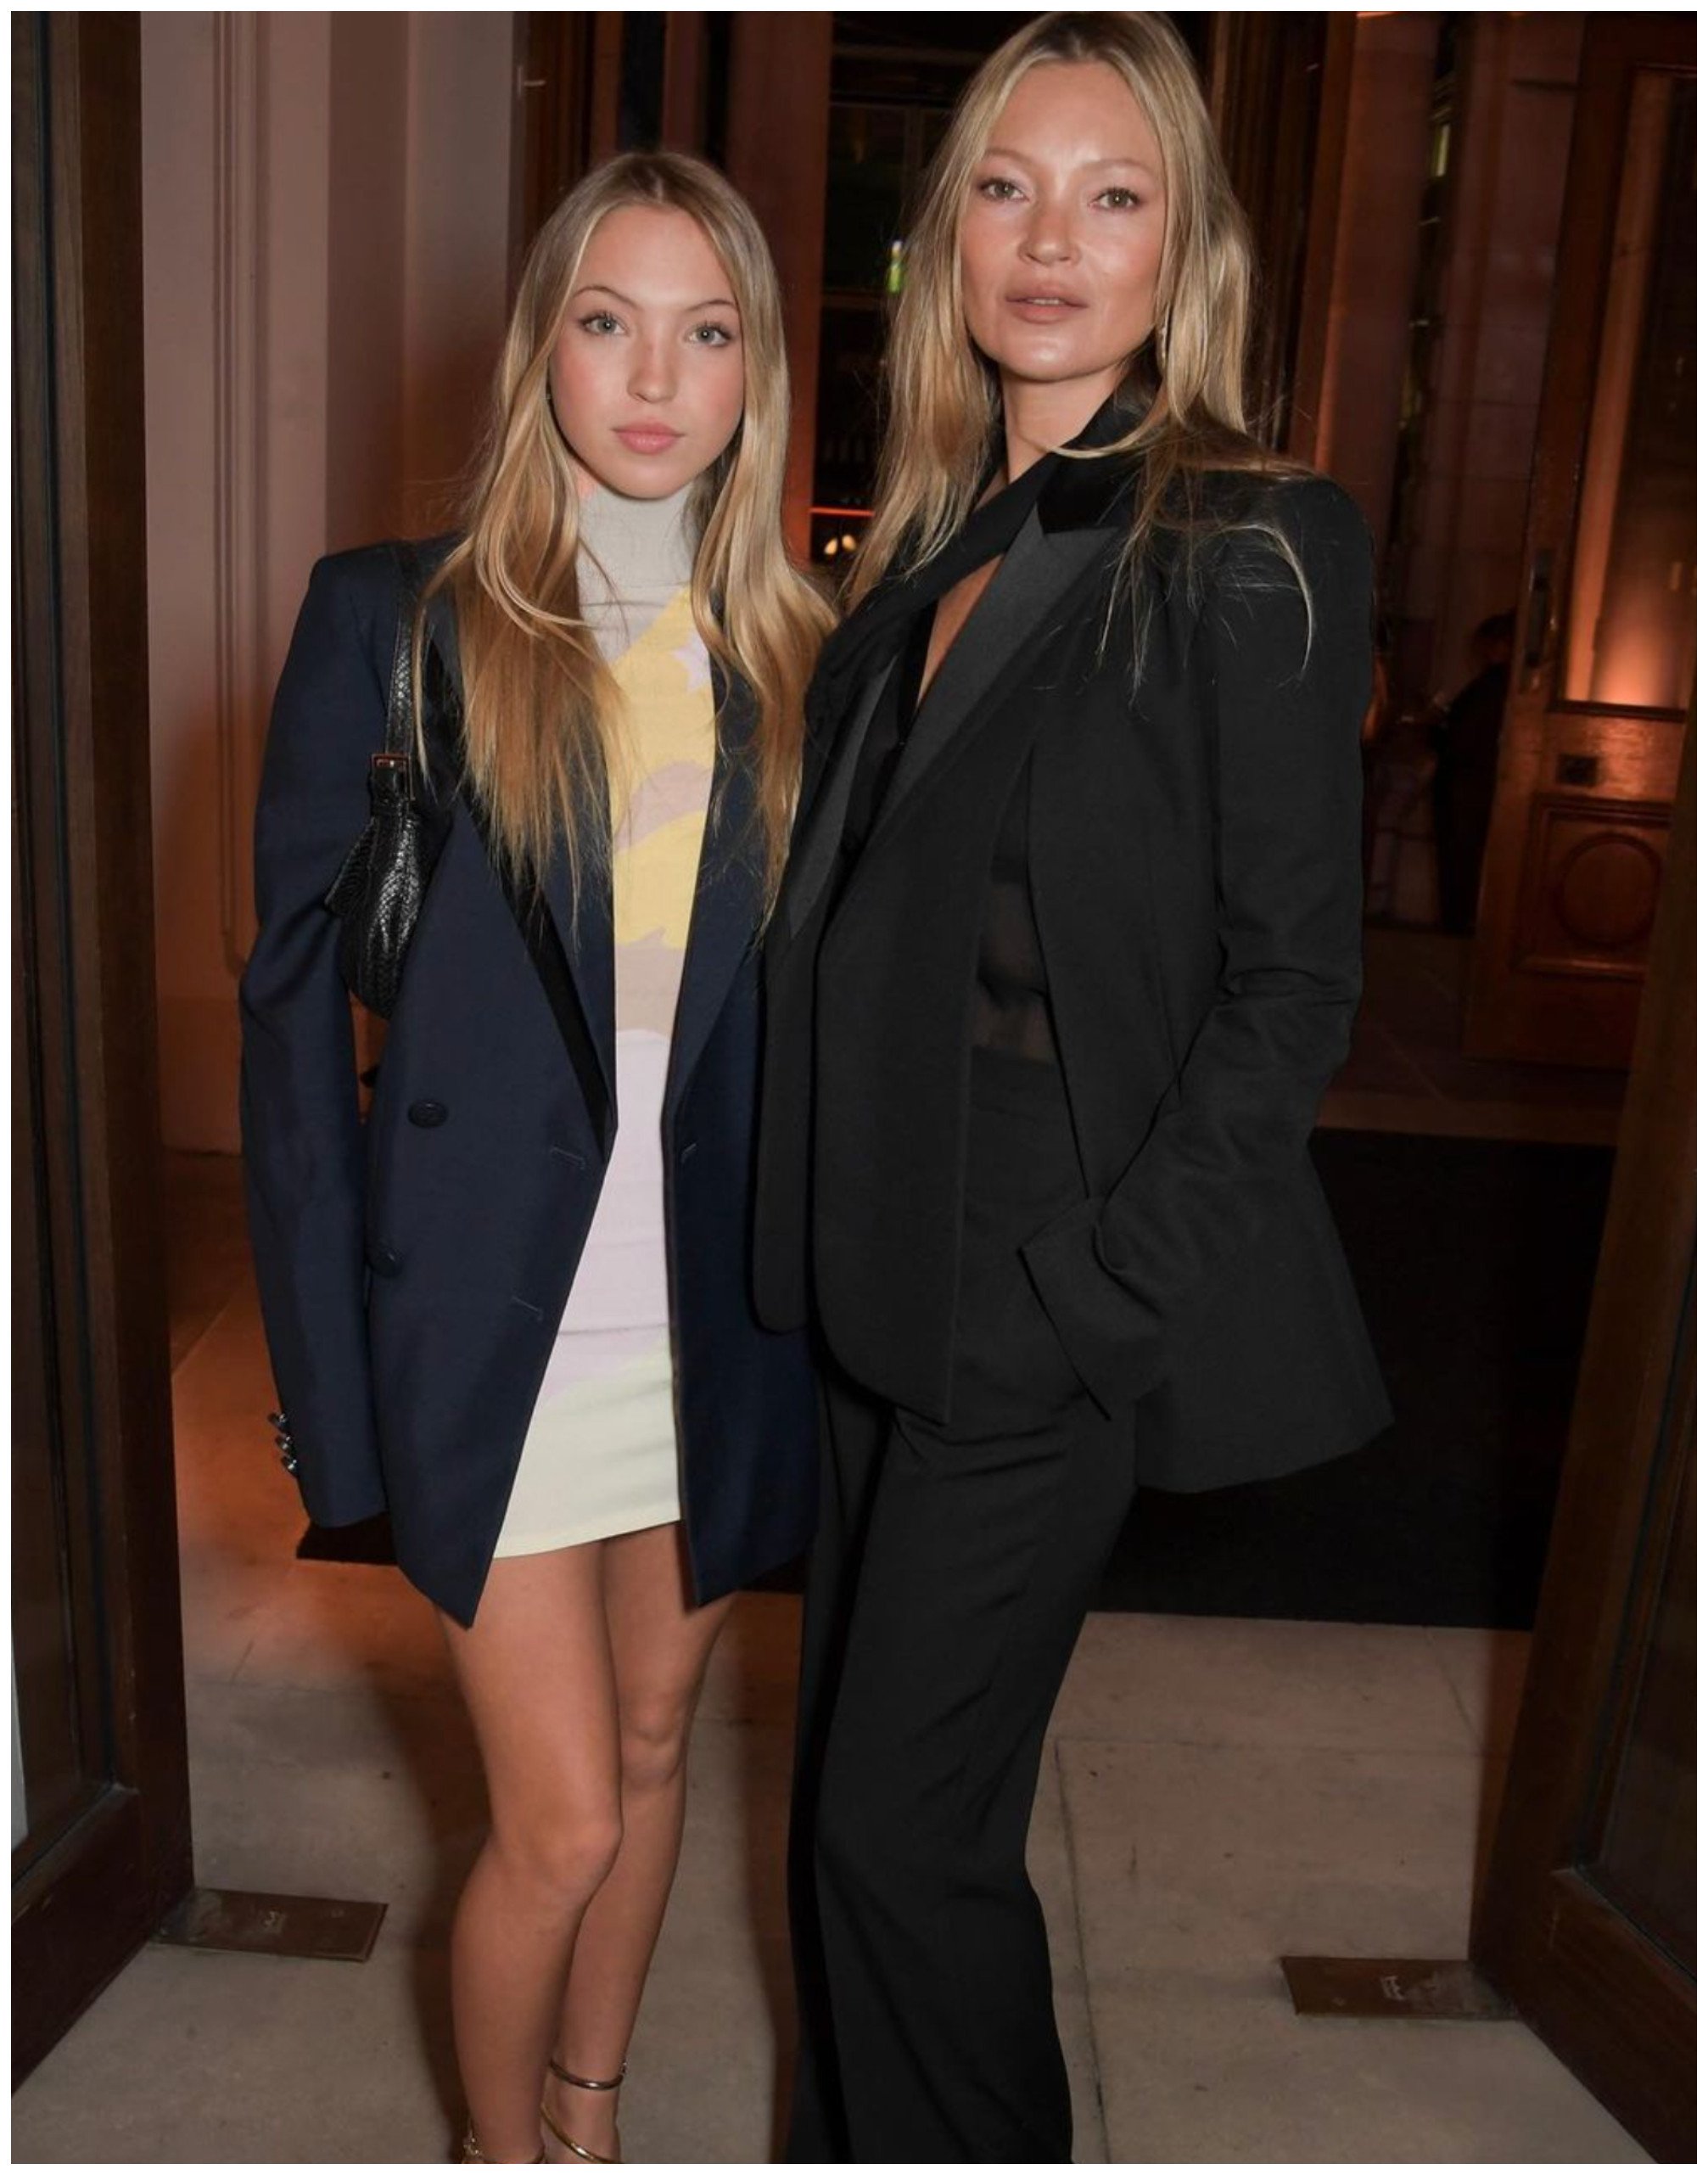 Lila Moss Honors Mom Kate Moss With Sheer Dress at the Fashion